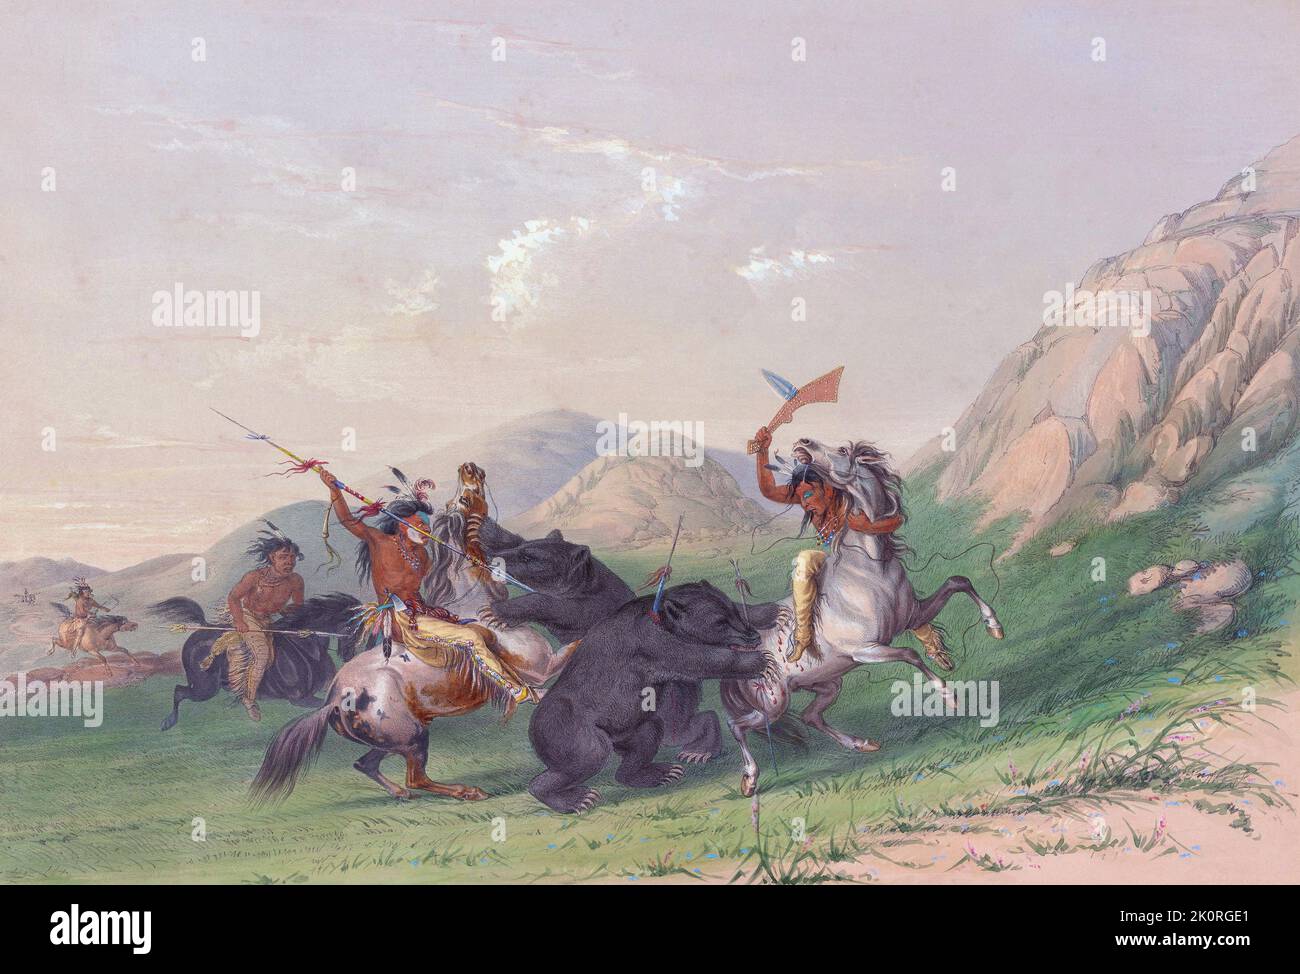 Attacking the Grizzly Bear.  Mounted Indians attack a bear with lances and an axe.  From Catlin's North American Indian Portfolio, published in London 1844 by the artist, American adventurer George Catlin, 1796 - 1872.  During many journeys Catlin recorded with pen and brush the customs and life-styles of Native American tribes. Stock Photo